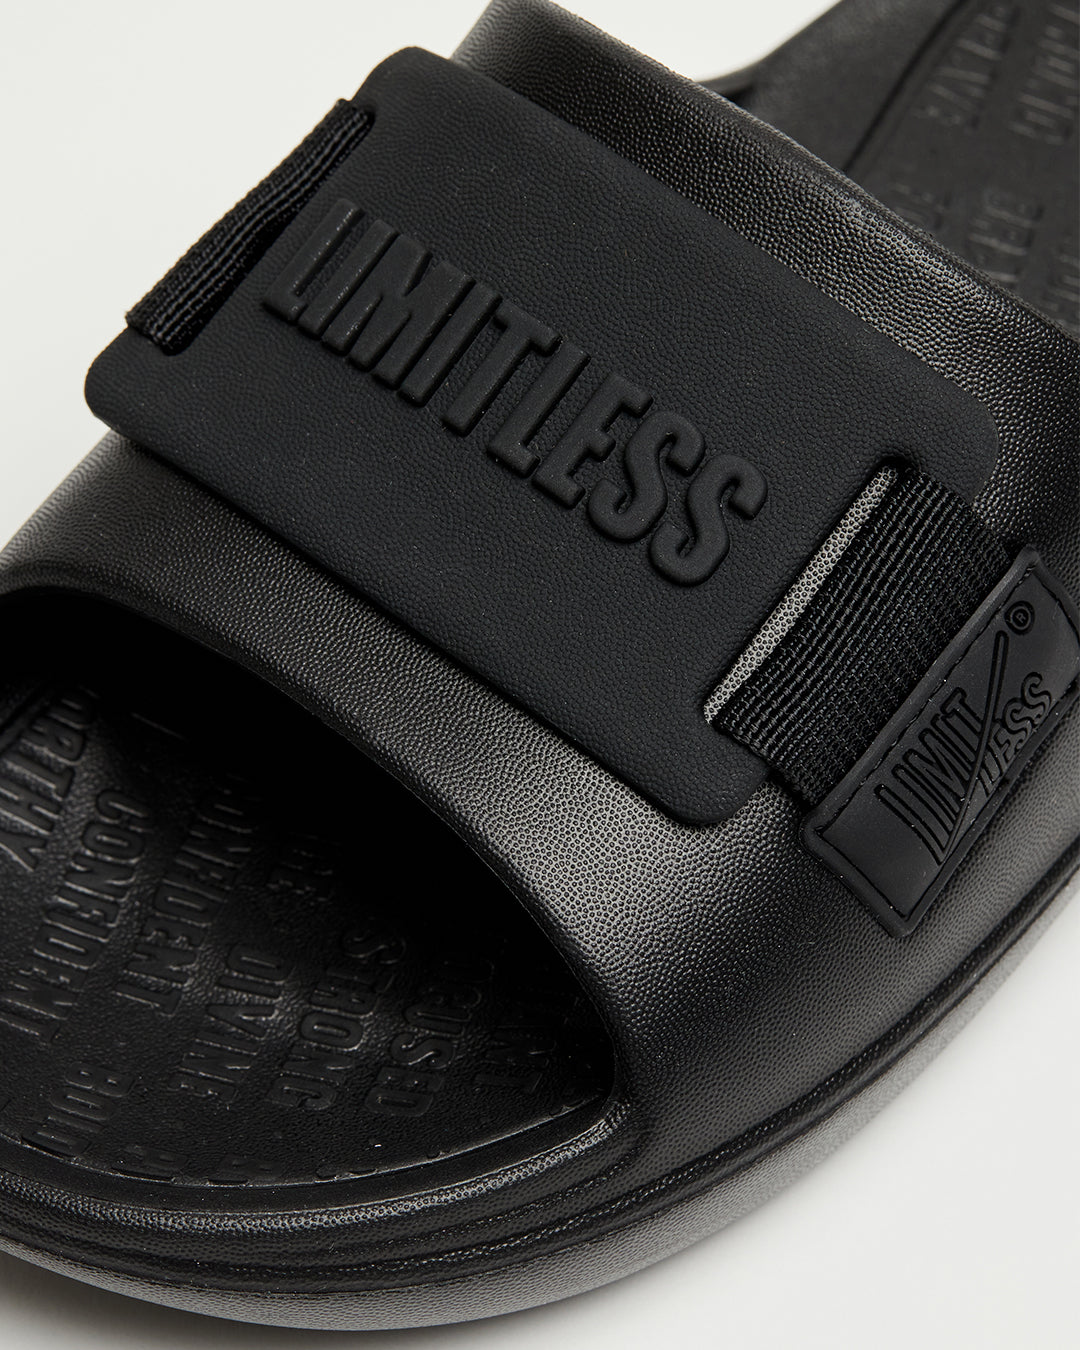 LIMITLESS SLIDES™ WITH ESSENTIAL TIBAH™ QUAD - FEARLESS DANCE CENTER EDITION